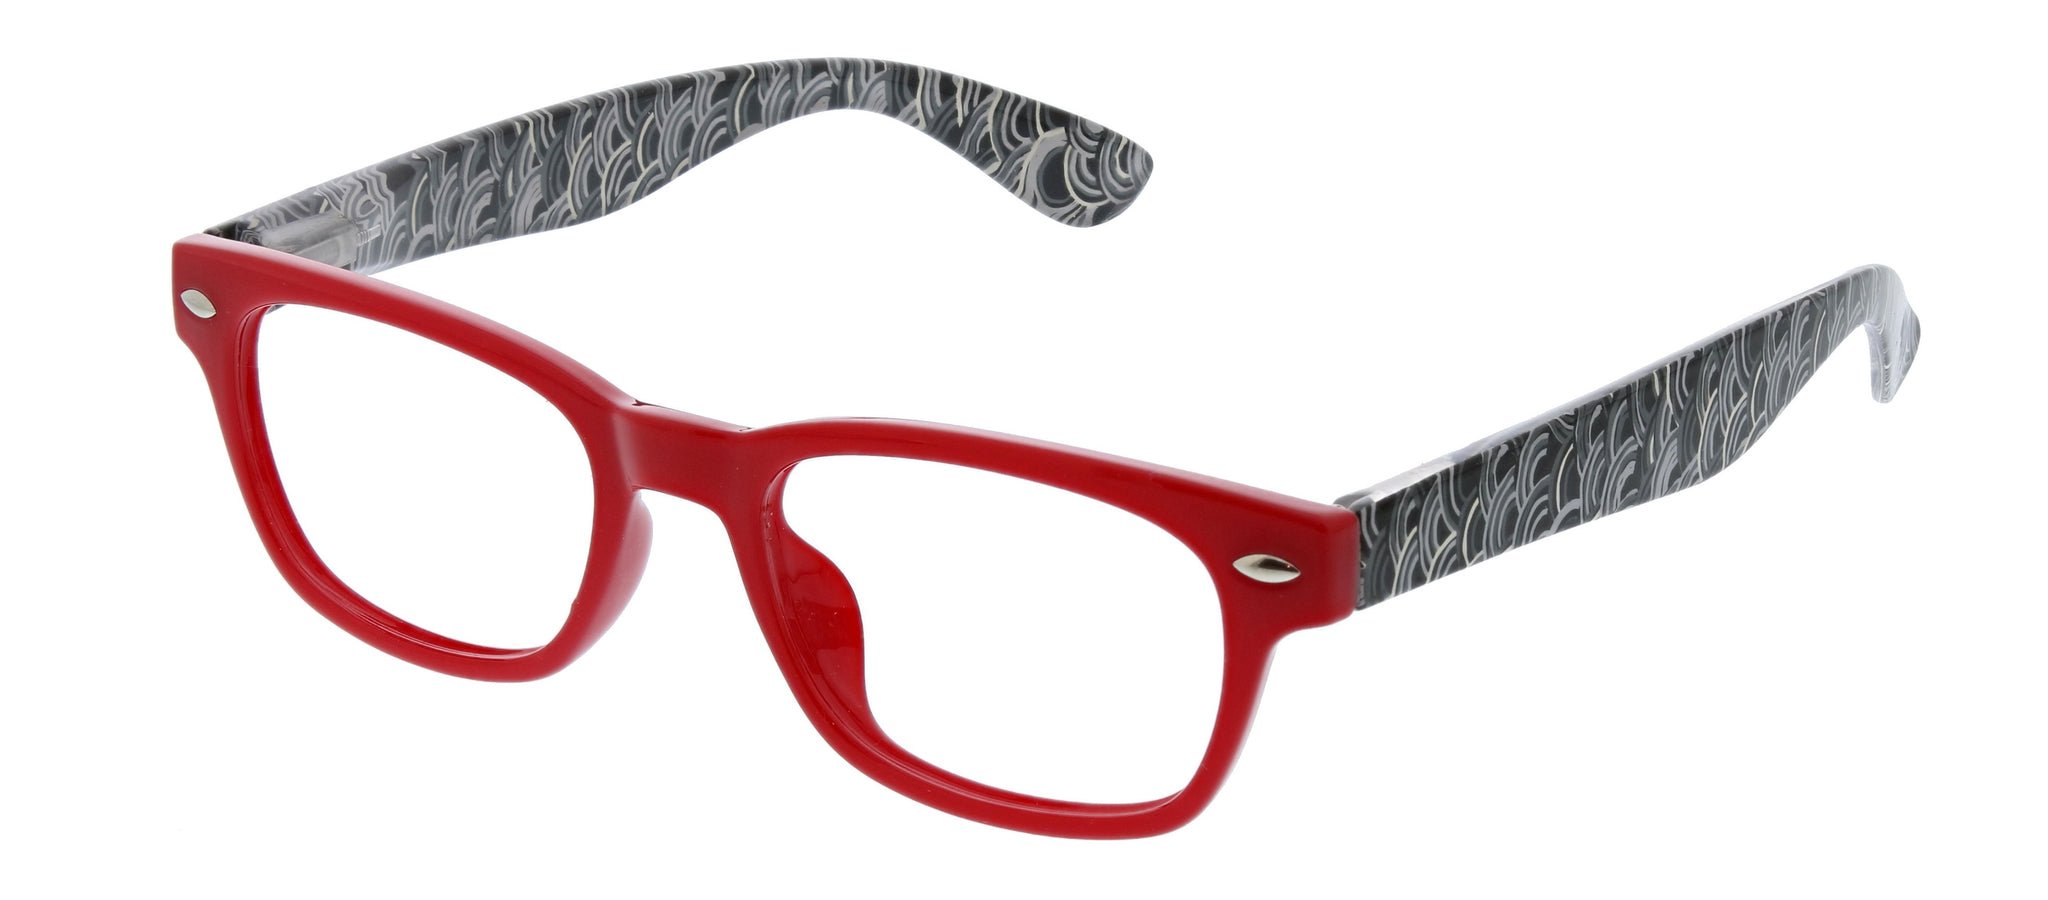 Wavelength blue light reading glasses in red by Peepers